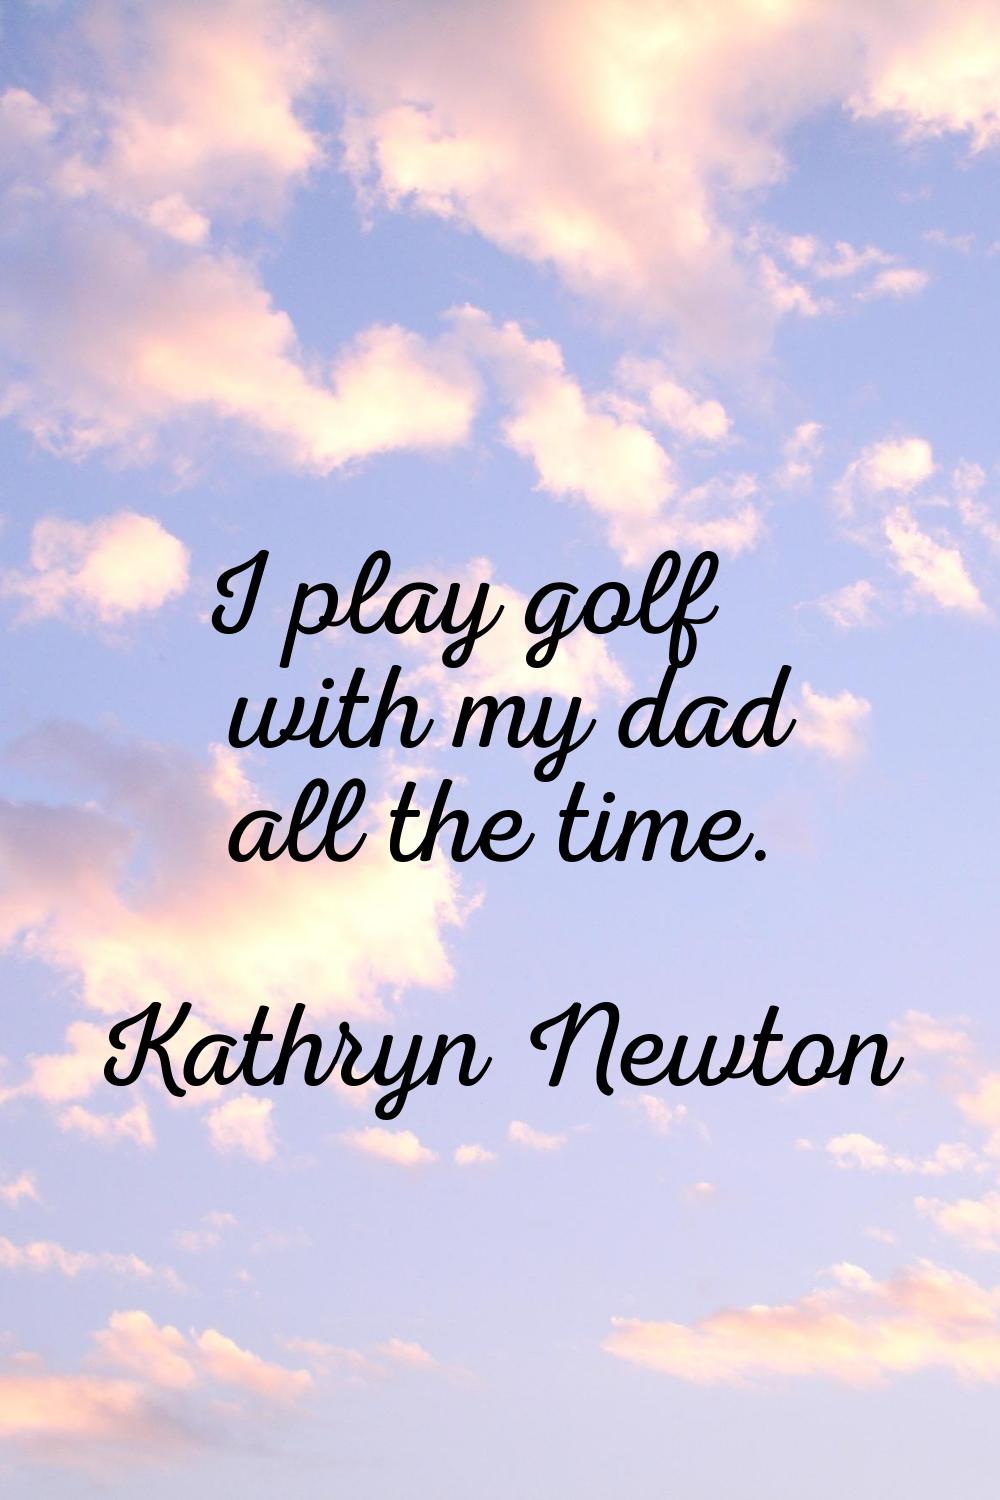 I play golf with my dad all the time.